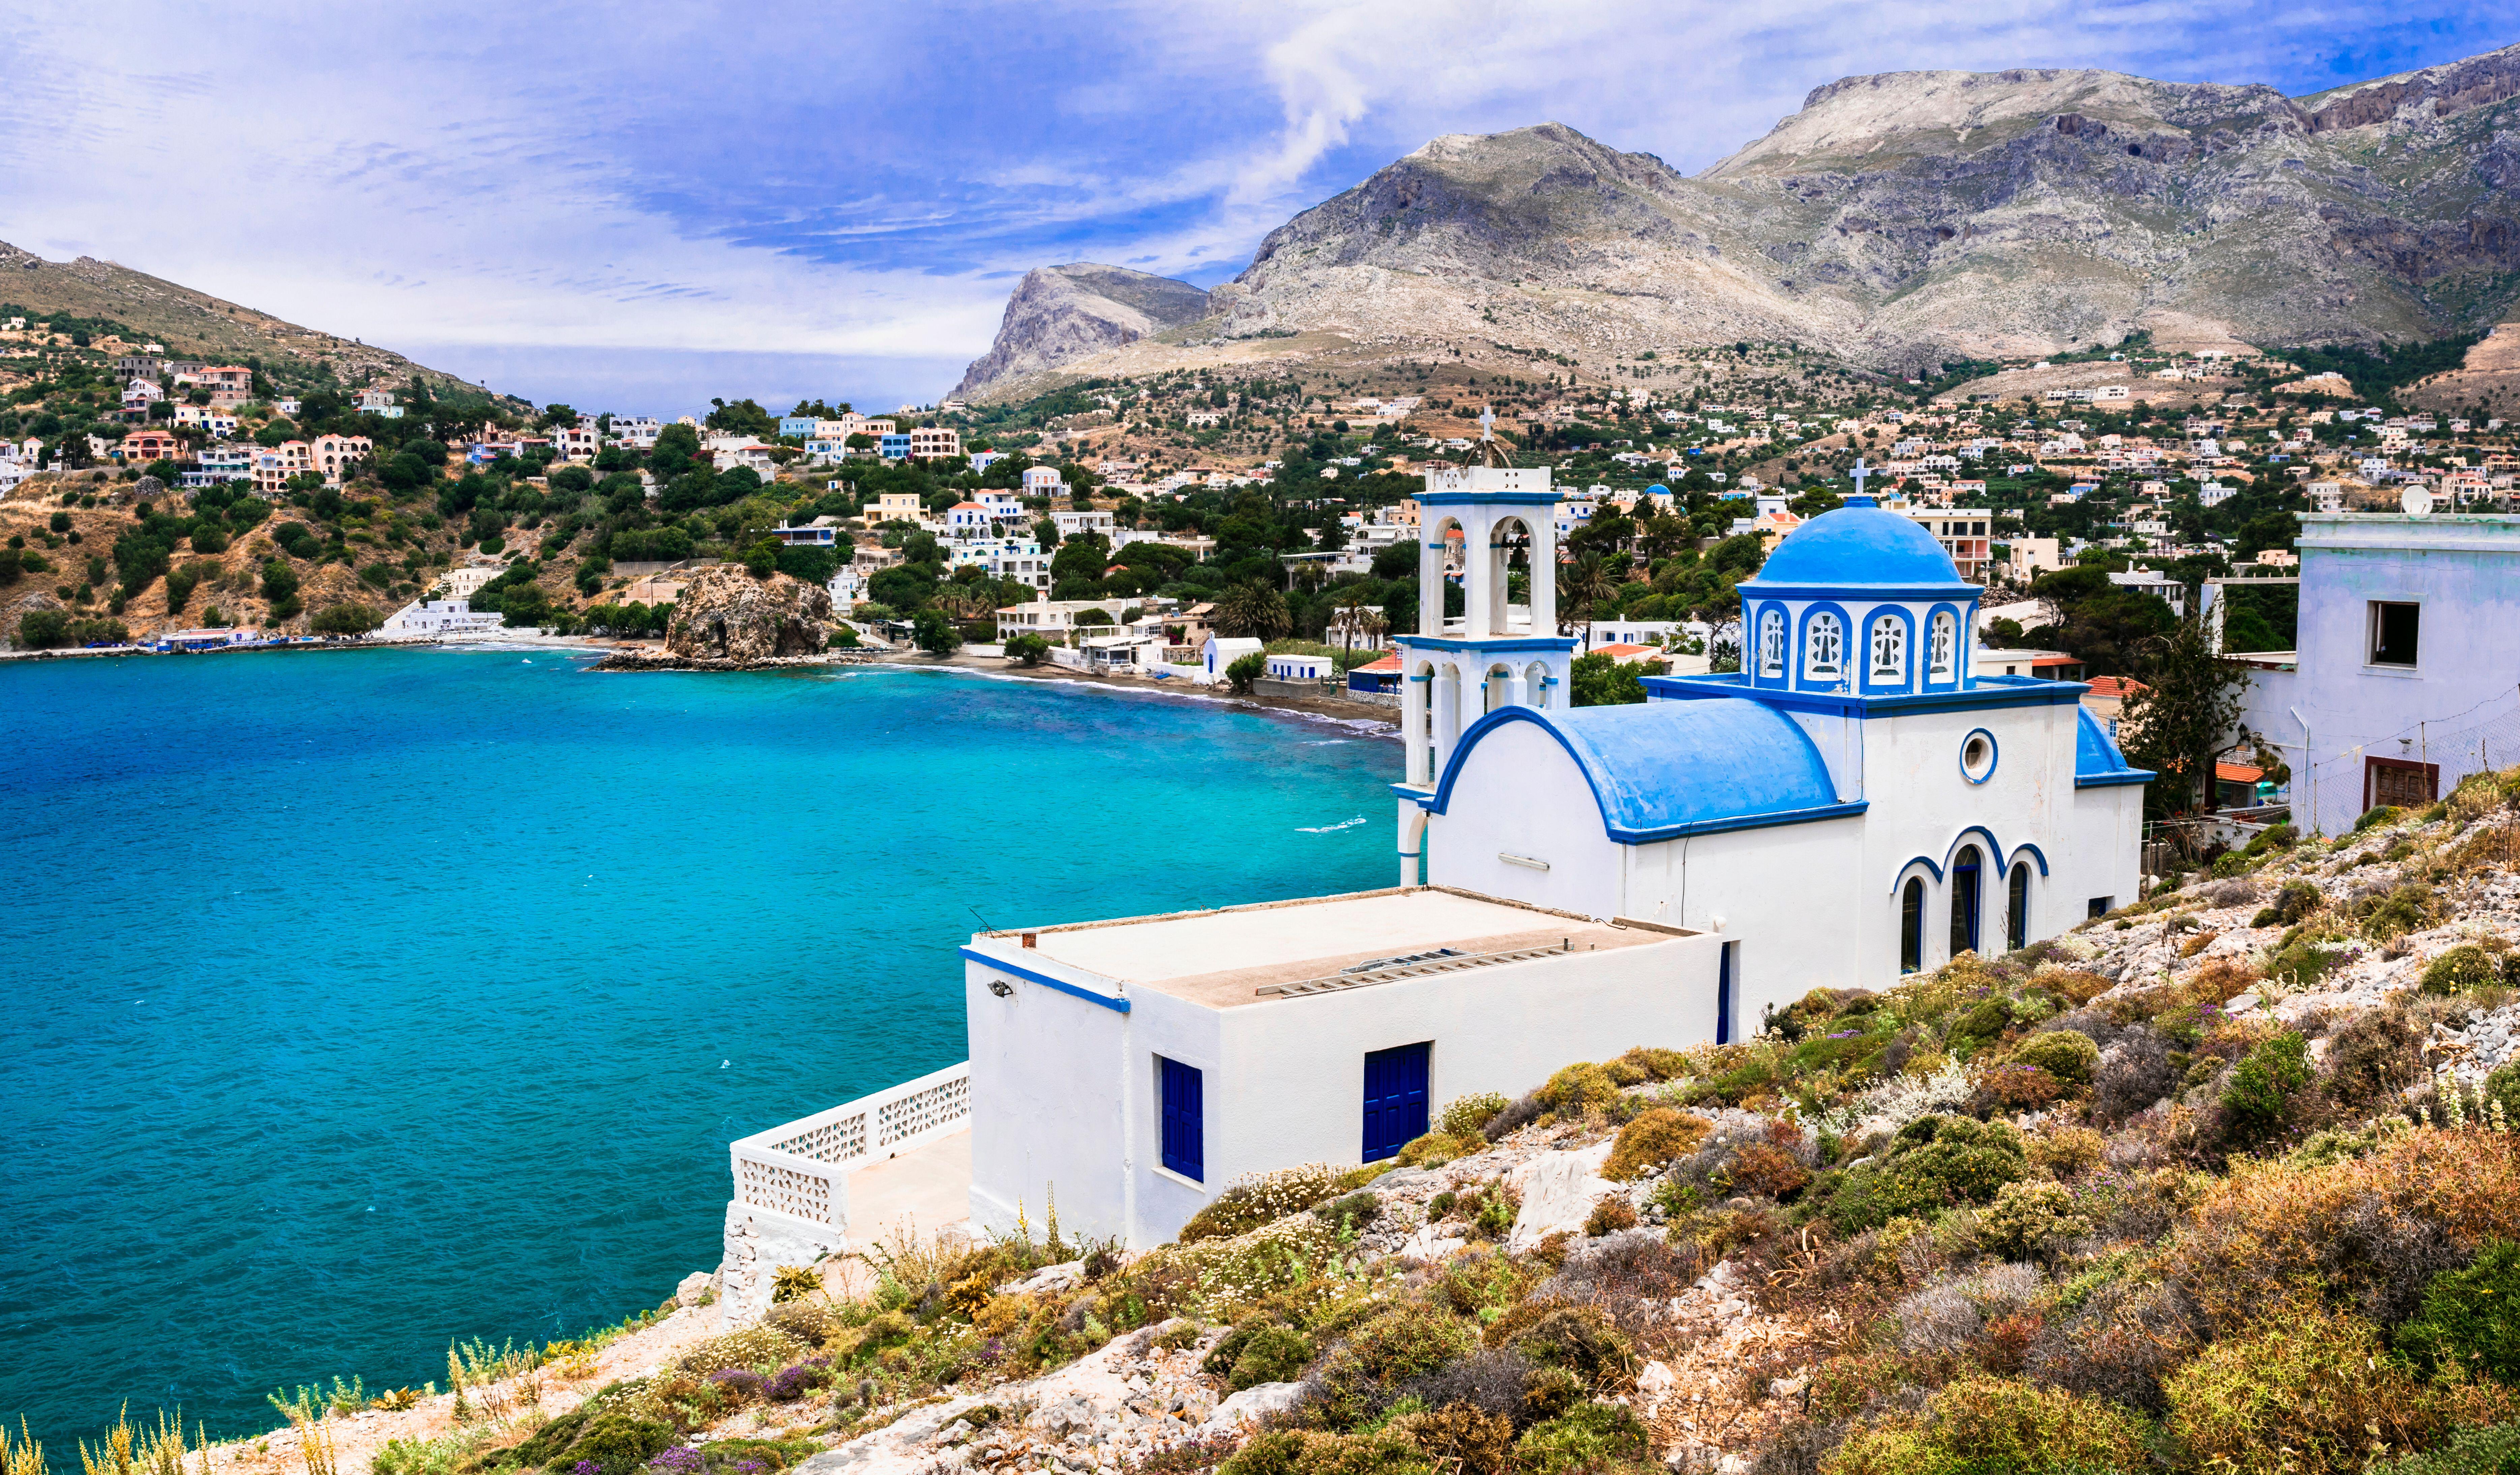 The island is part of the Dodecanese Island Group